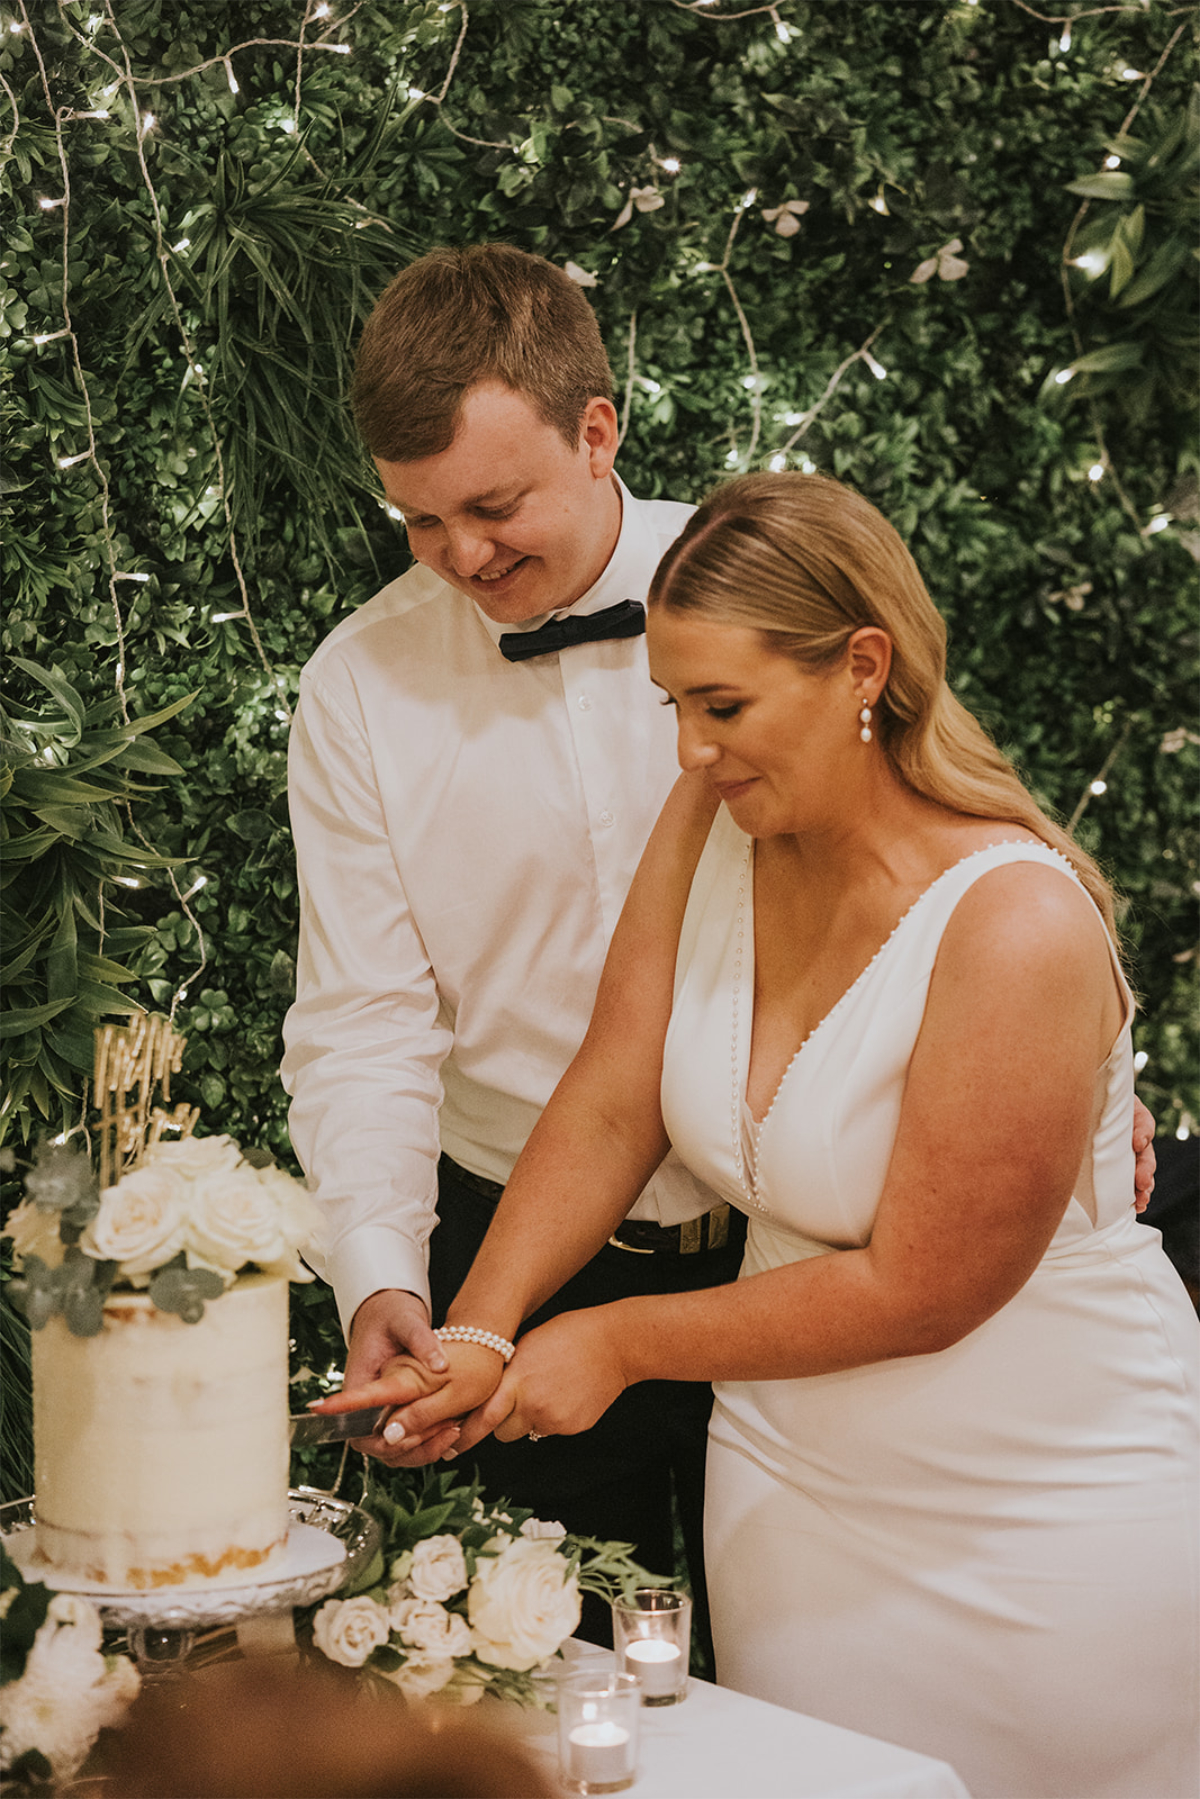 Walkabout Creek wedding for Caitlyn and Thomas photographed by Meadow Lane Visuals